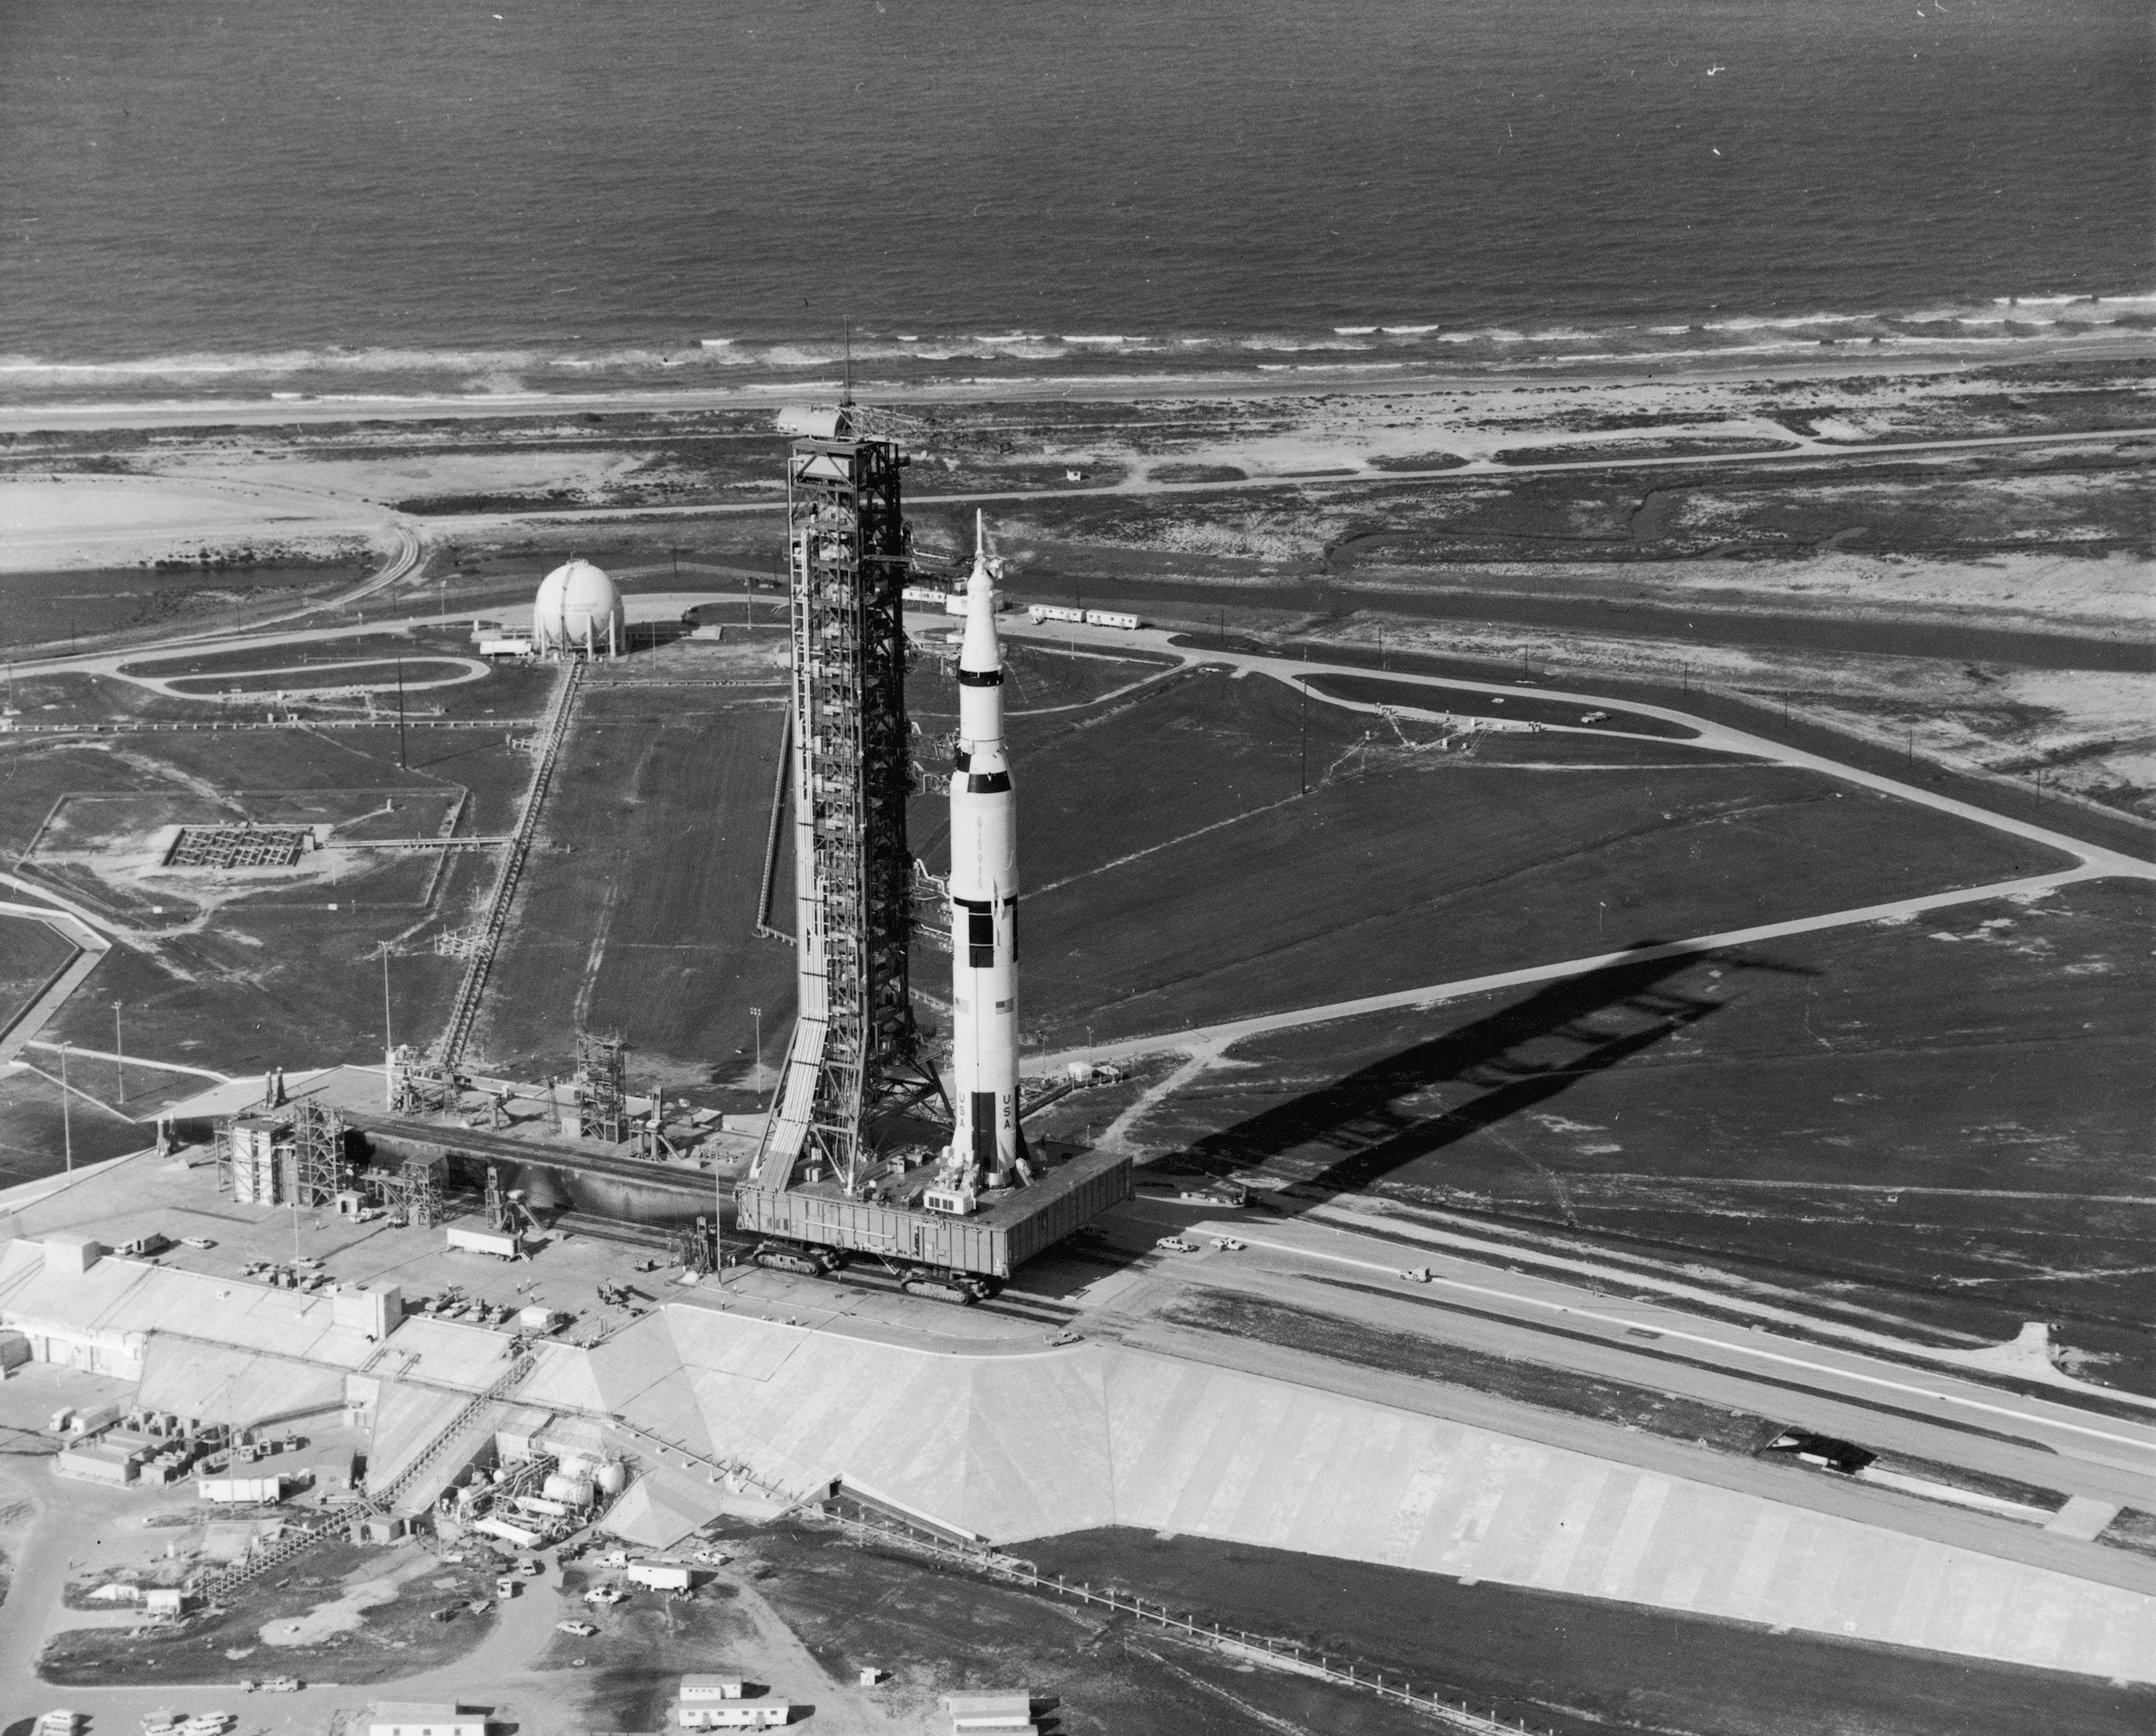 16th July 1969:  View of the Apollo 11 rocket standing with its gantry on the launch pad at Kennedy Space Center, Cape Canaveral, Florida. The rocket served the first American manned lunar mission, with Neil Armstrong, Michael Collins and Edwin Aldrin.  (Photo by Hulton Archive/Getty Images)